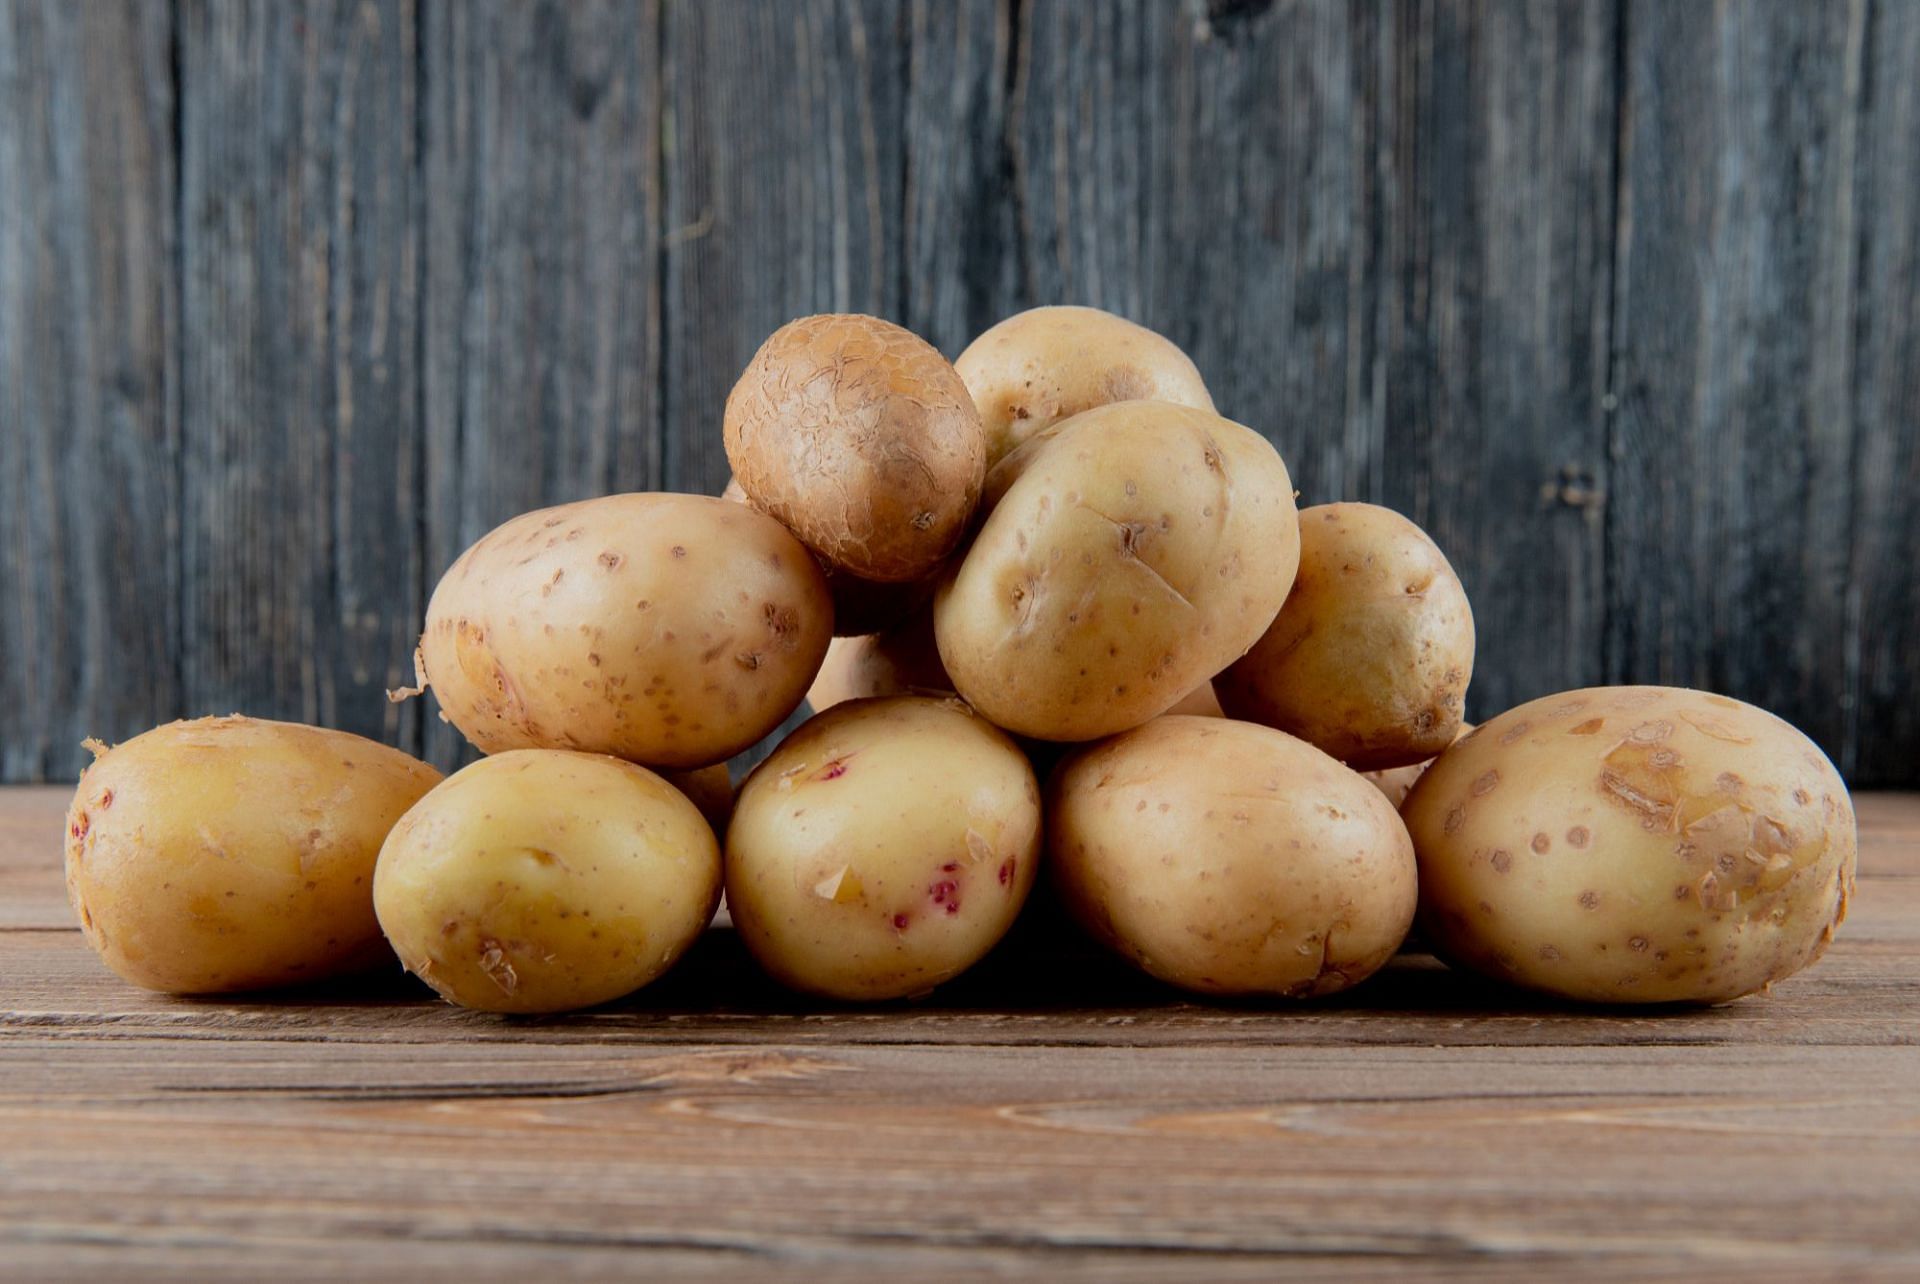 Are sprouted potatoes good for health? (Image by stockking on Freepik)